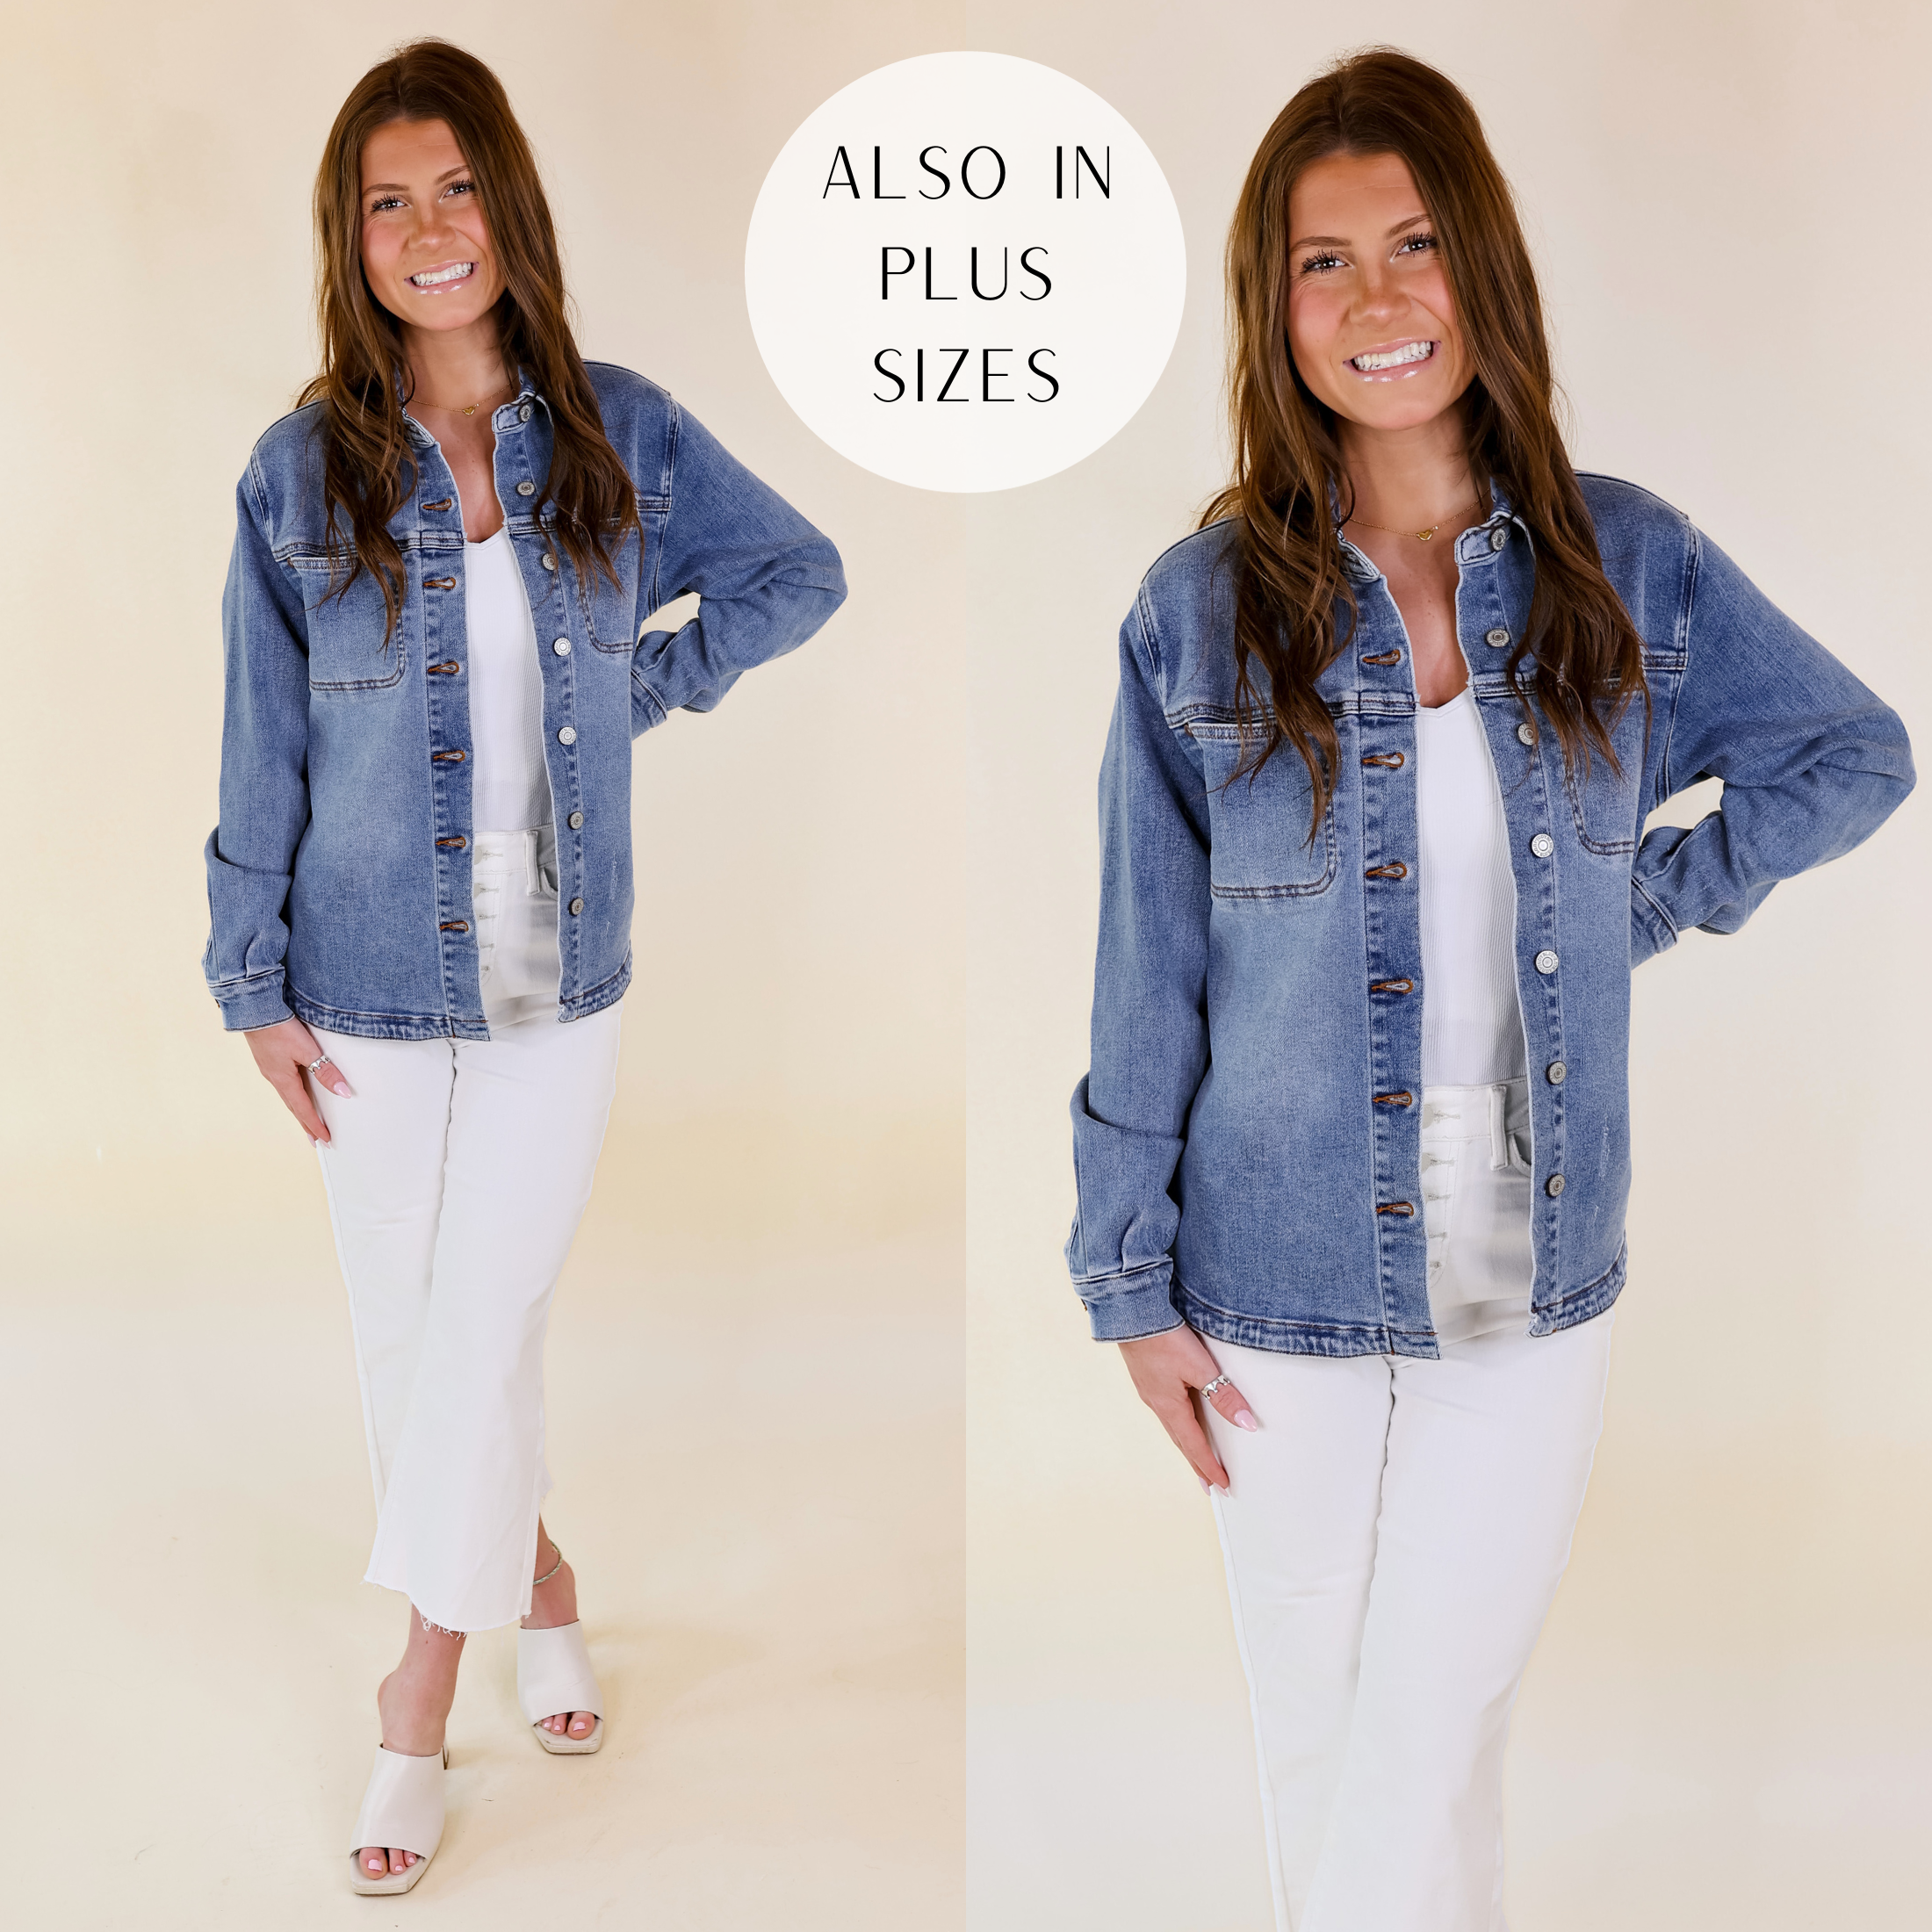 Model is wearing a medium wash denim jacket with a button up front, collared neckline, and long sleeves. Model has it paired with a white bodysuit, white jeans, white heels, and gold jewelry.